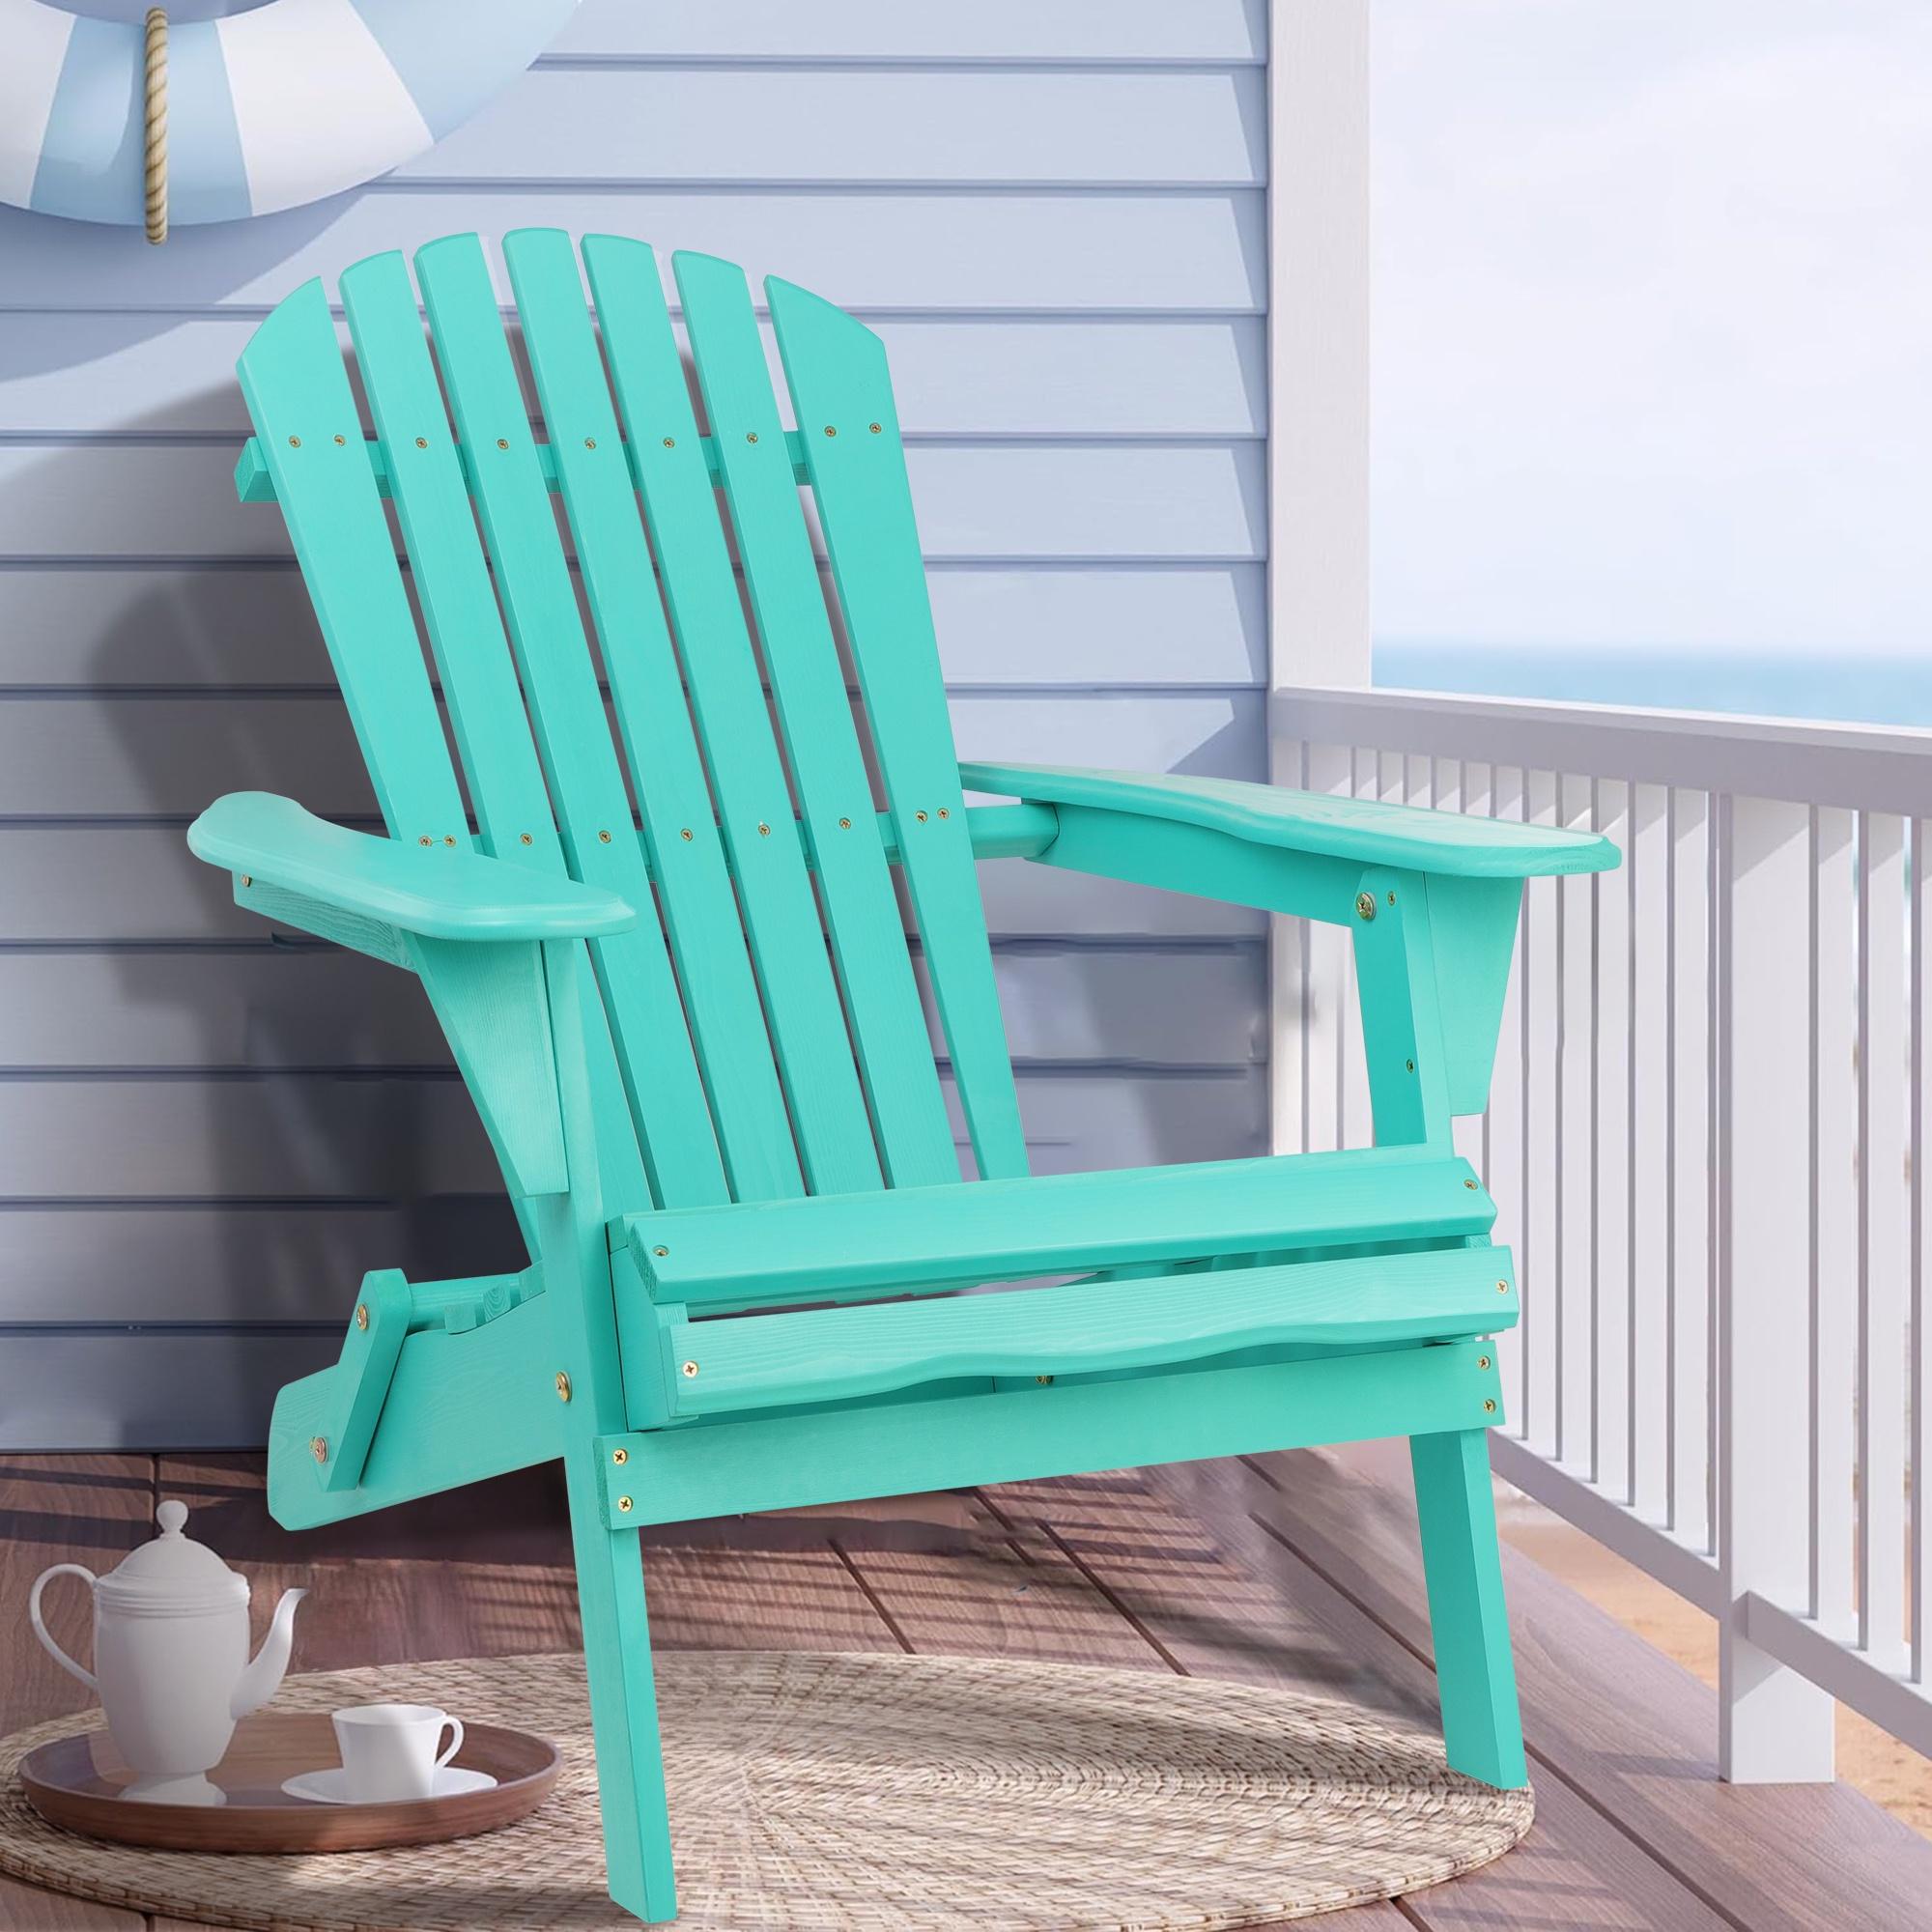 Outdoor Adirondack Chair, Seizeen Wooden Folding Adirondack Chair, Patio Furniture Lounge Chair Quick Assembled, Outdoor Chairs for Deck Pool Yard Garden, Cyan - image 2 of 8